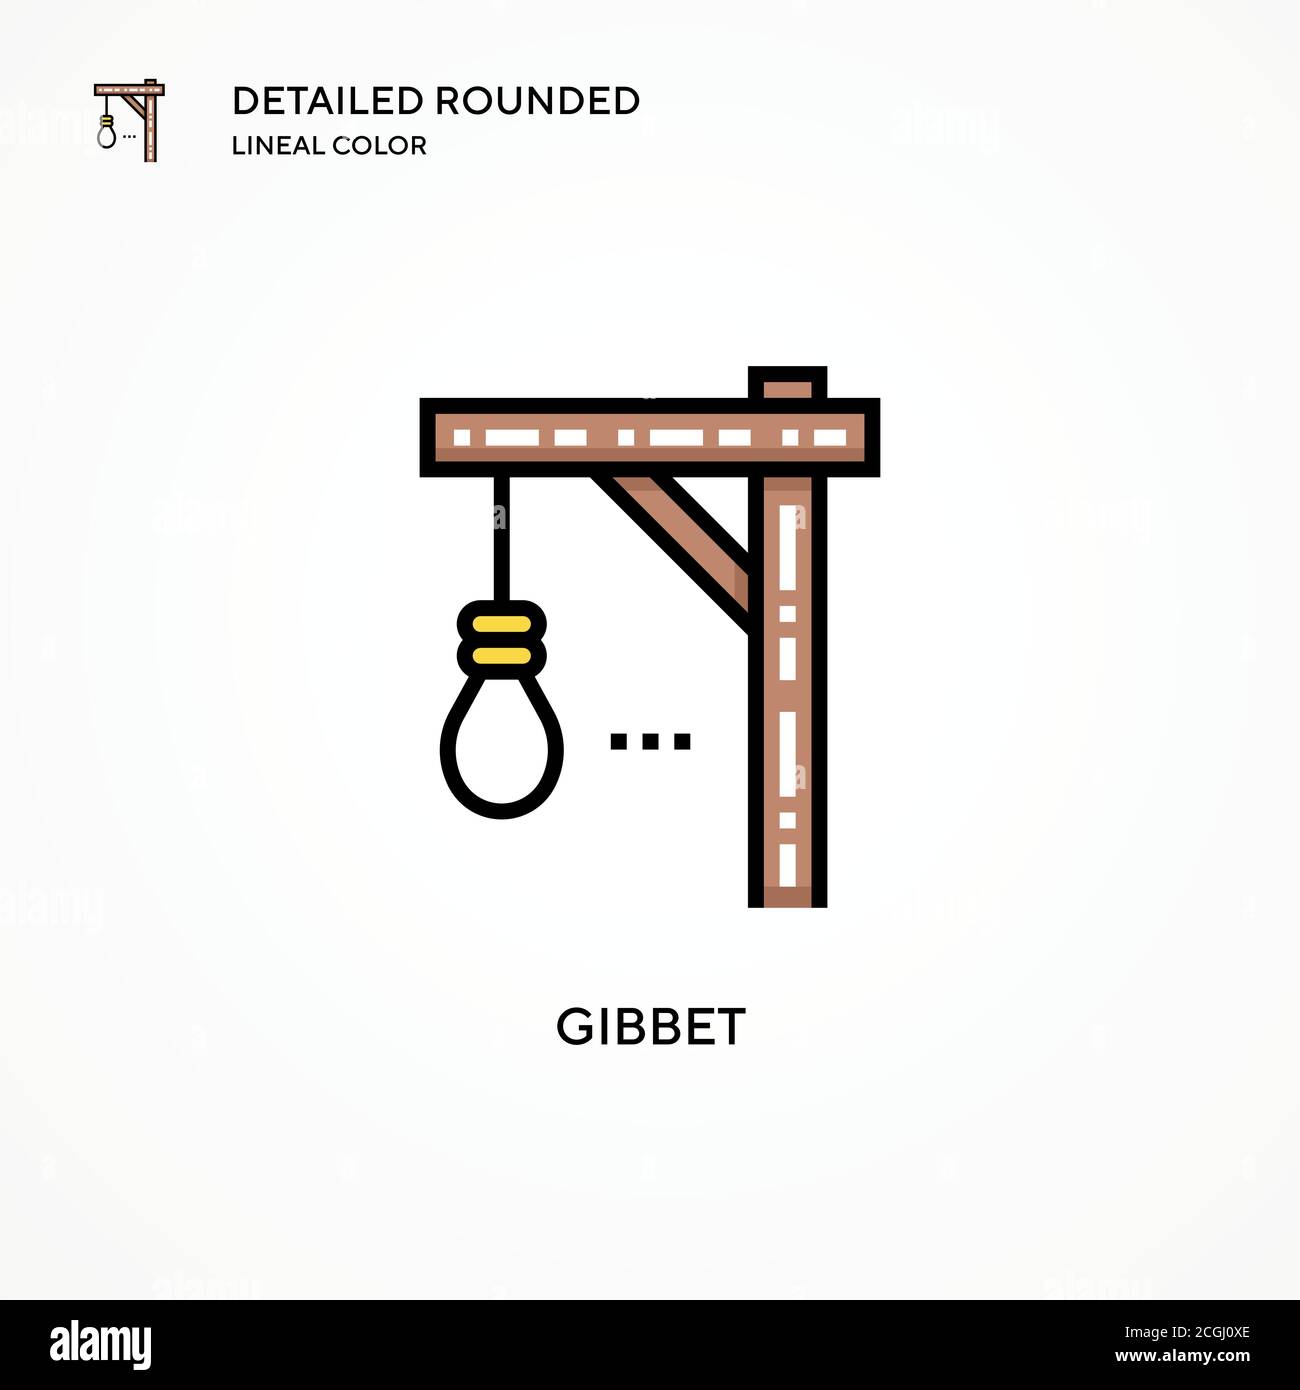 Gibbet vector icon. Modern vector illustration concepts. Easy to edit and customize. Stock Vector